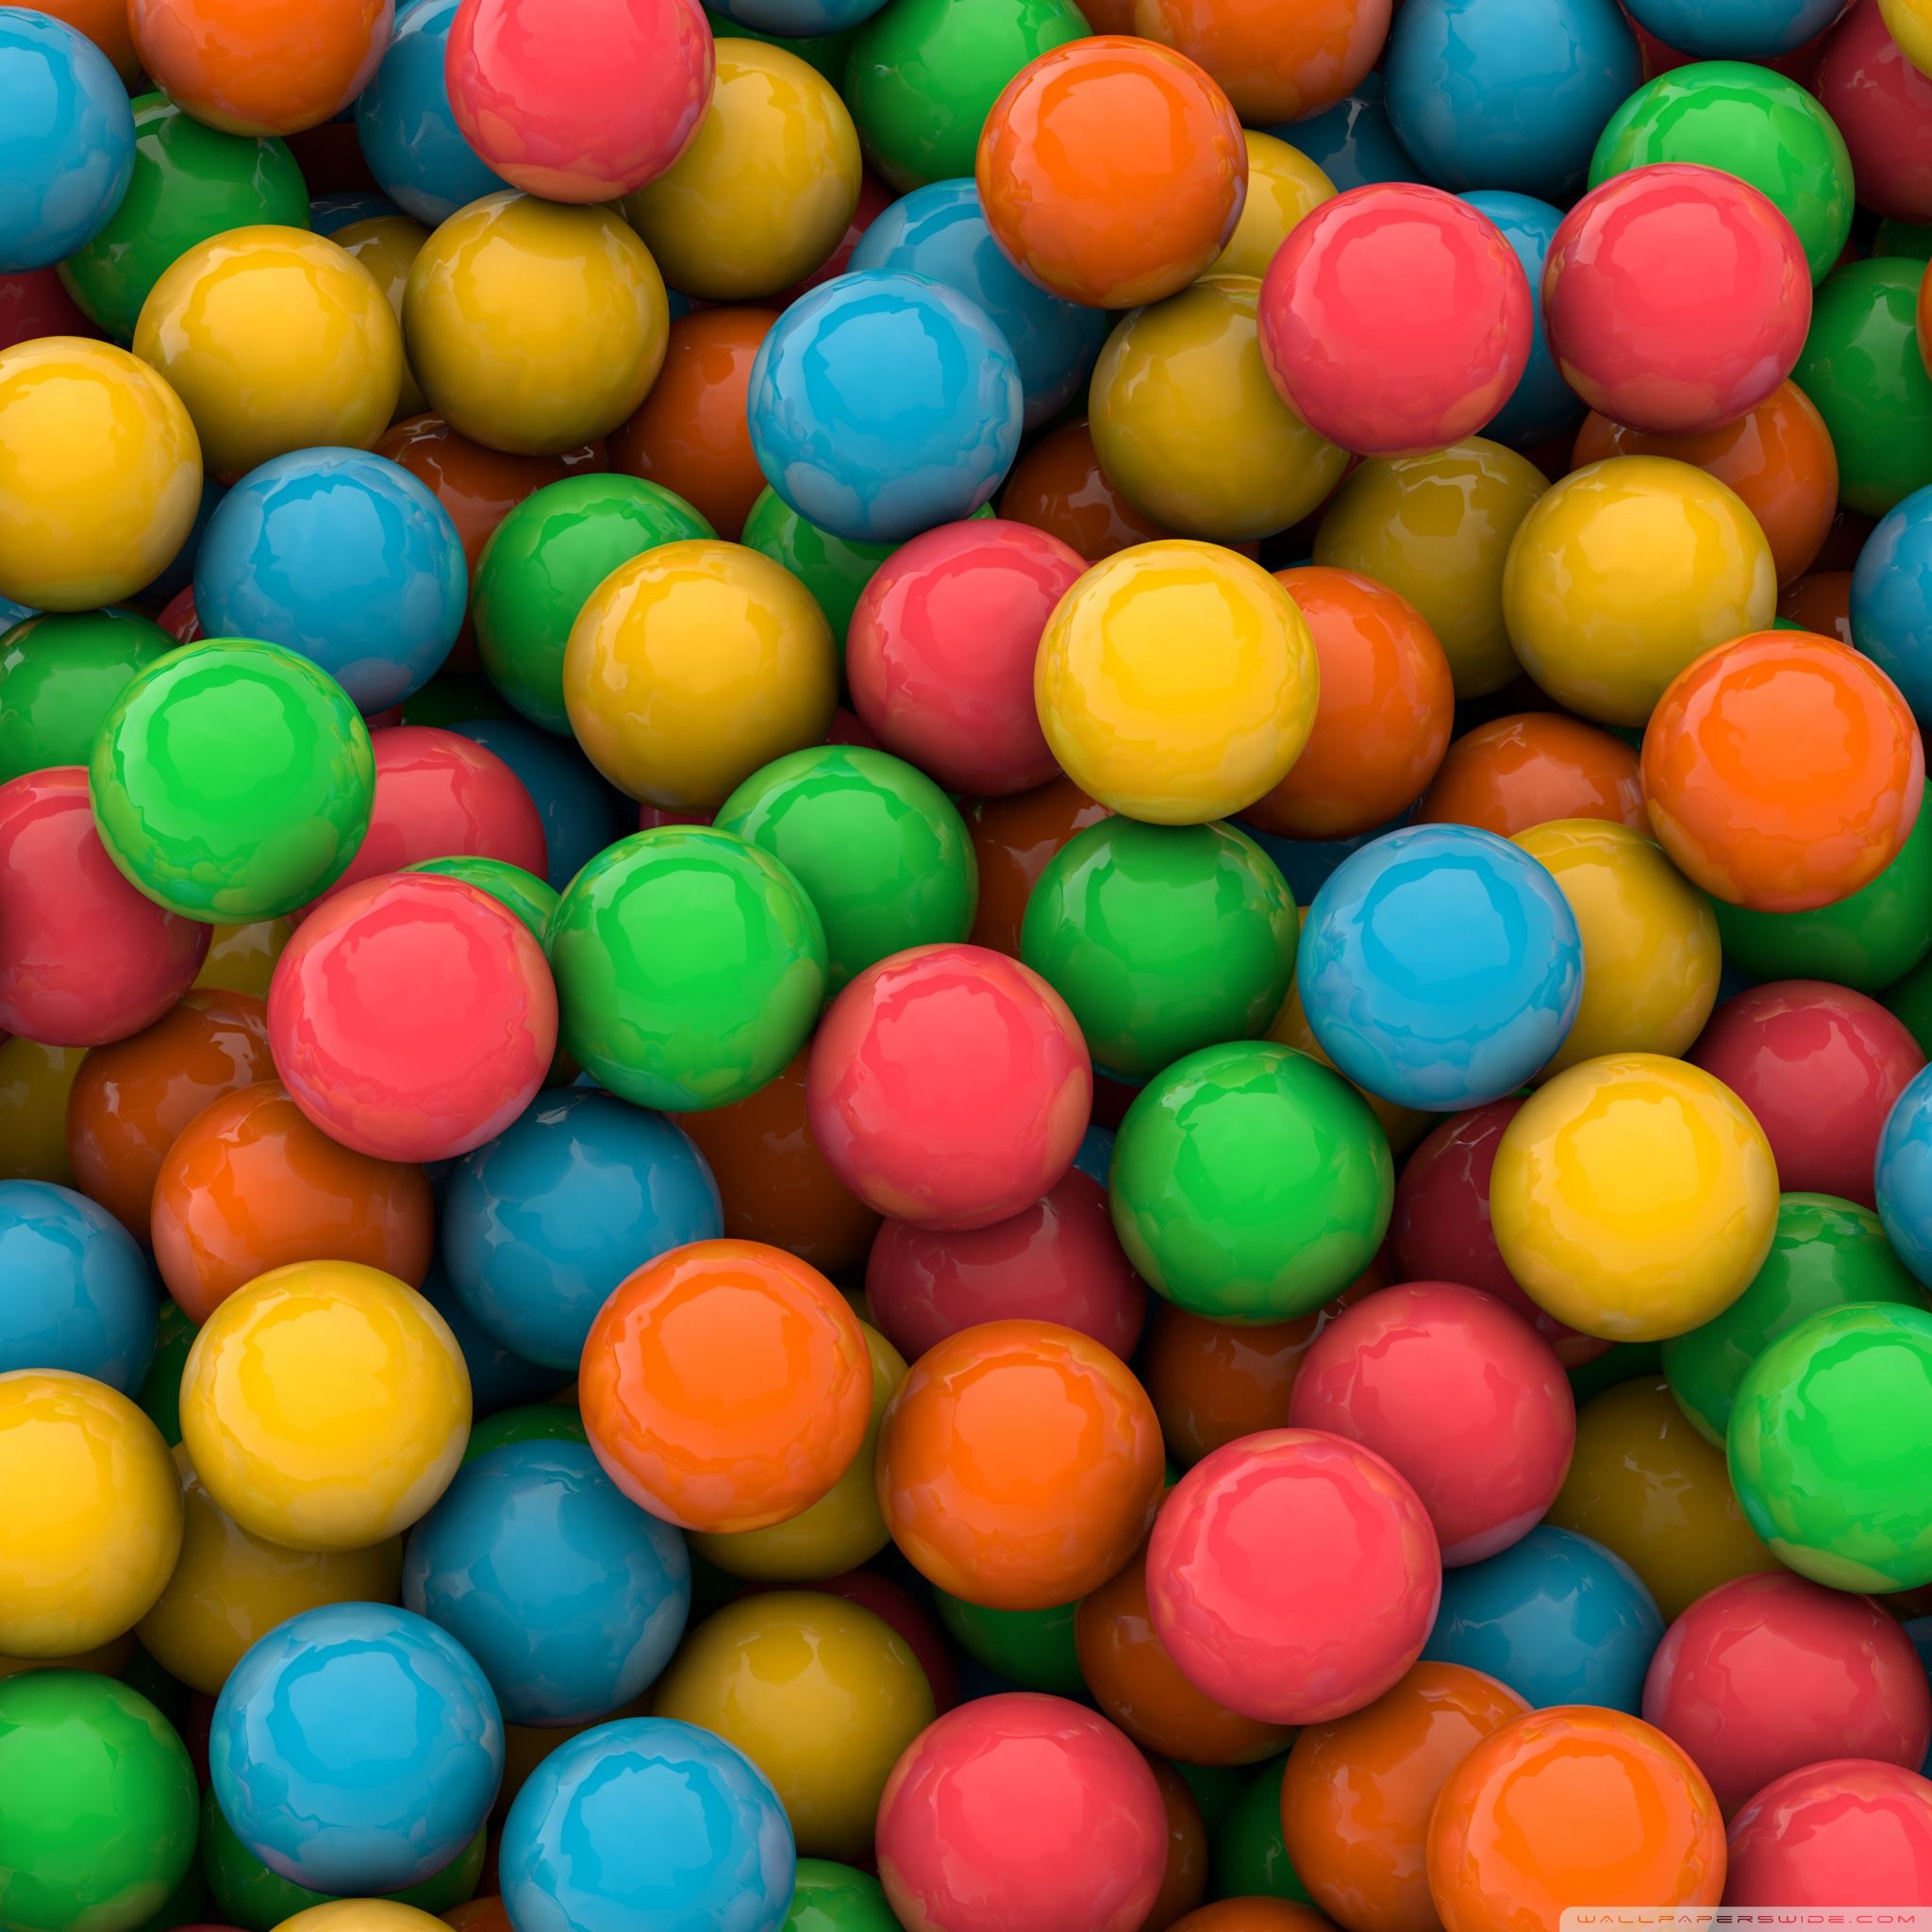 The color of candies iPad Air wallpaper 